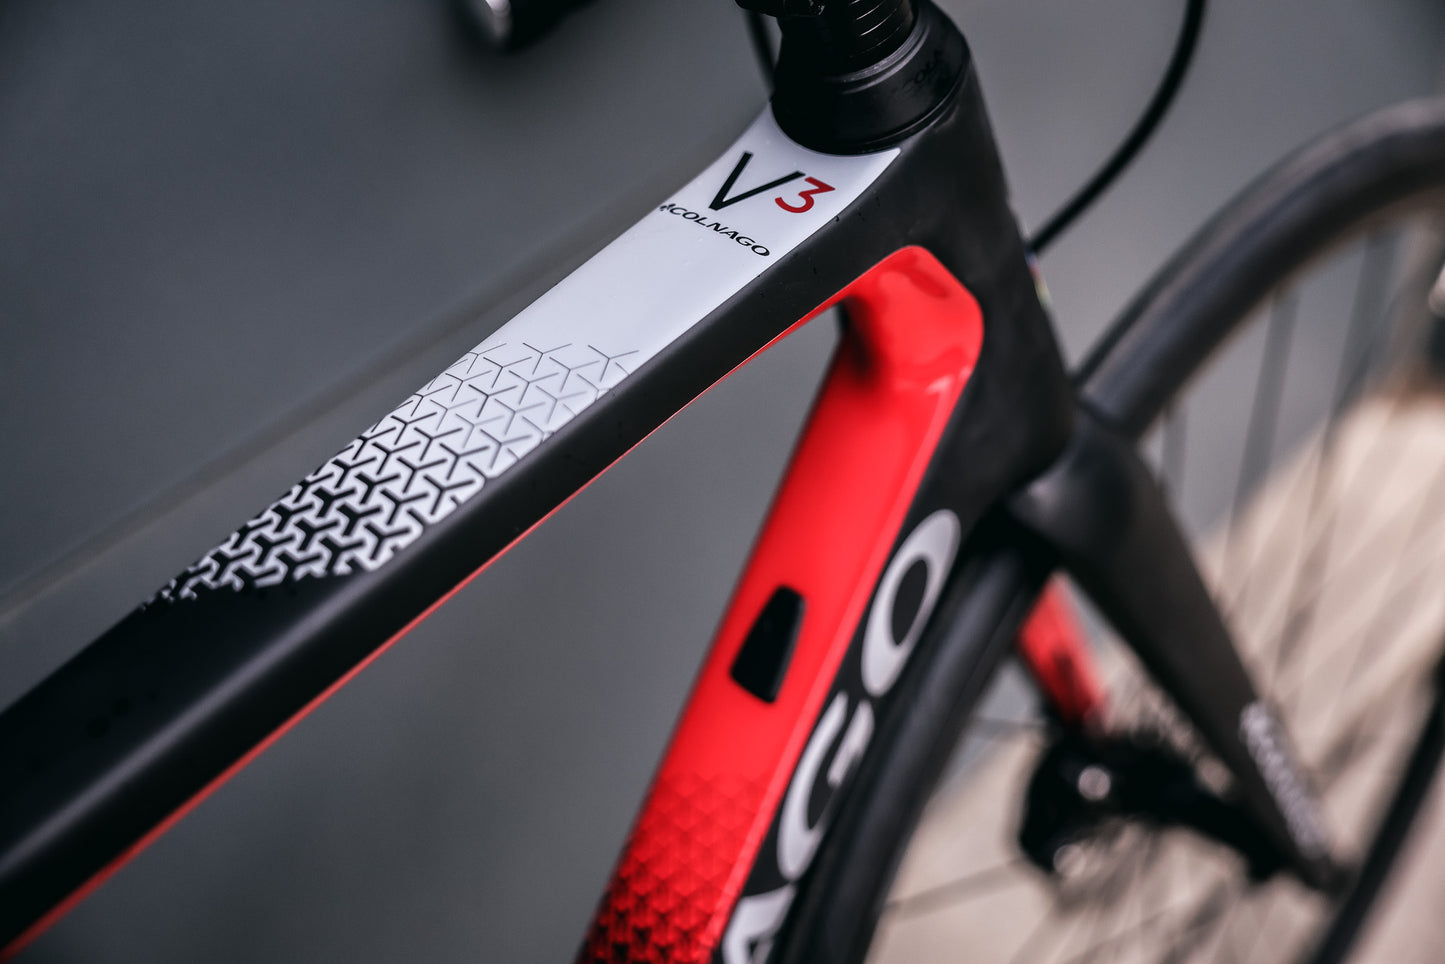 Colnago V3 disc 52 Red (Rival AXS)